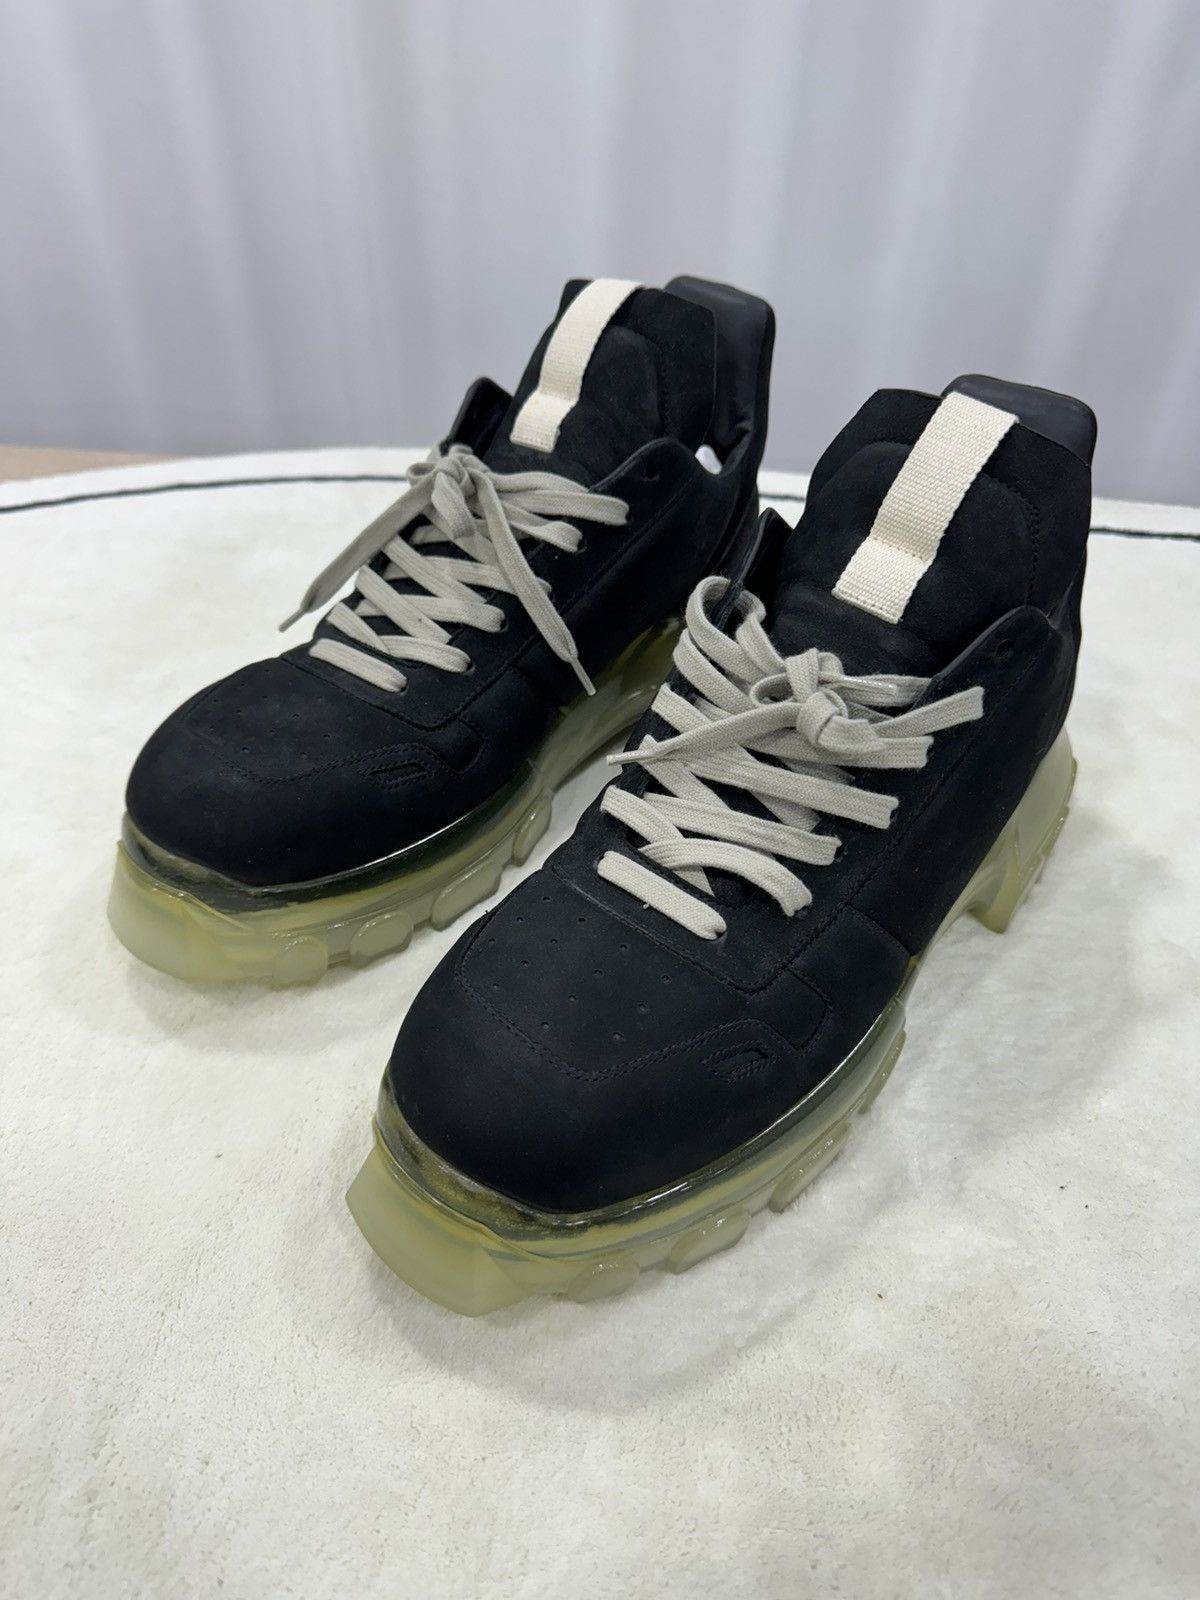 Rick Owens Tractor Sneakers | Grailed